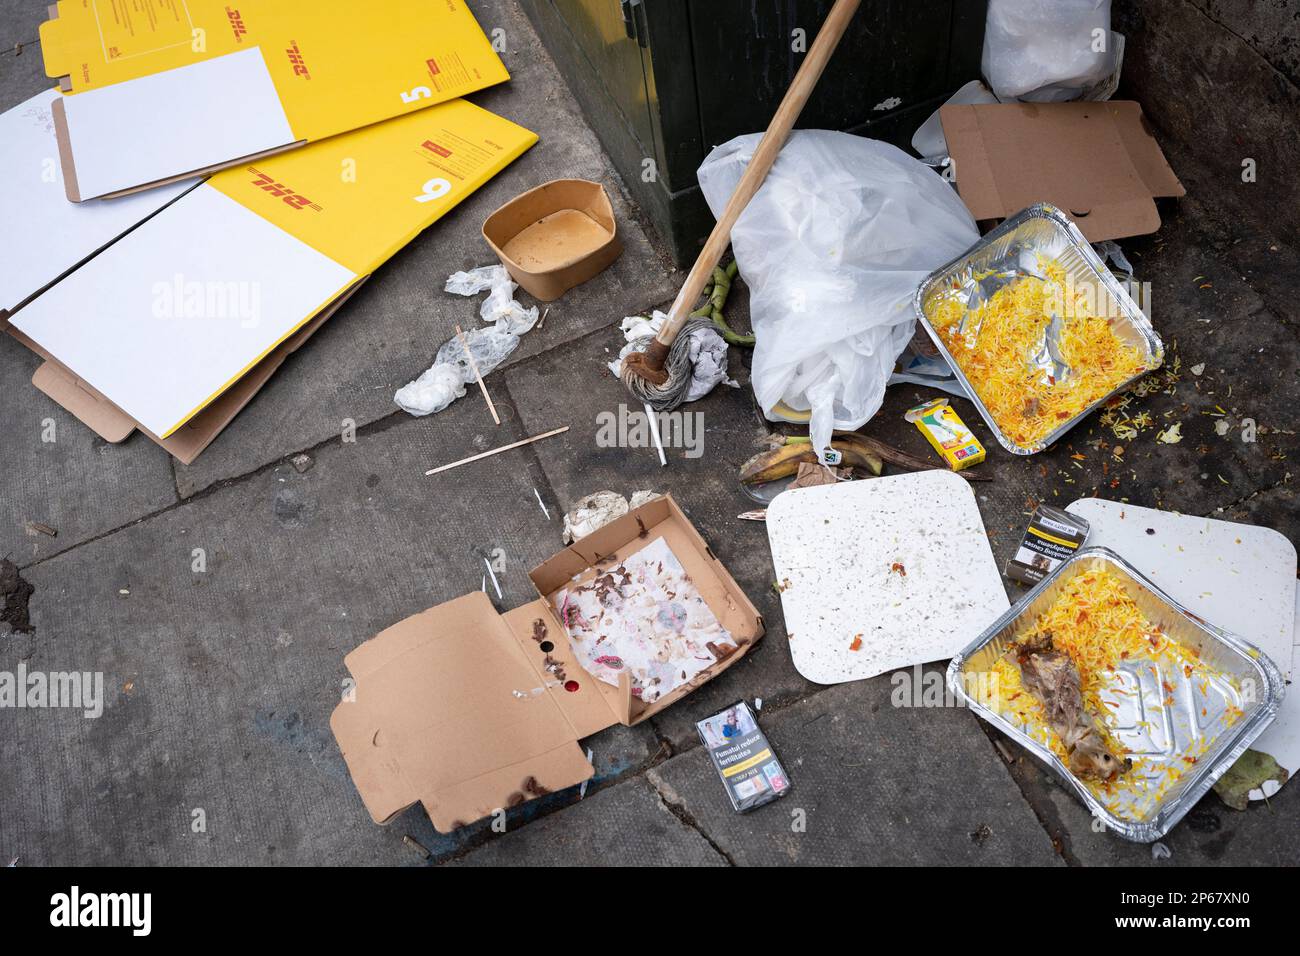 Packaging litter and food waste is spread across the pavement in a Cricklewood side street, on 6th March 2023, in London, England. Stock Photo